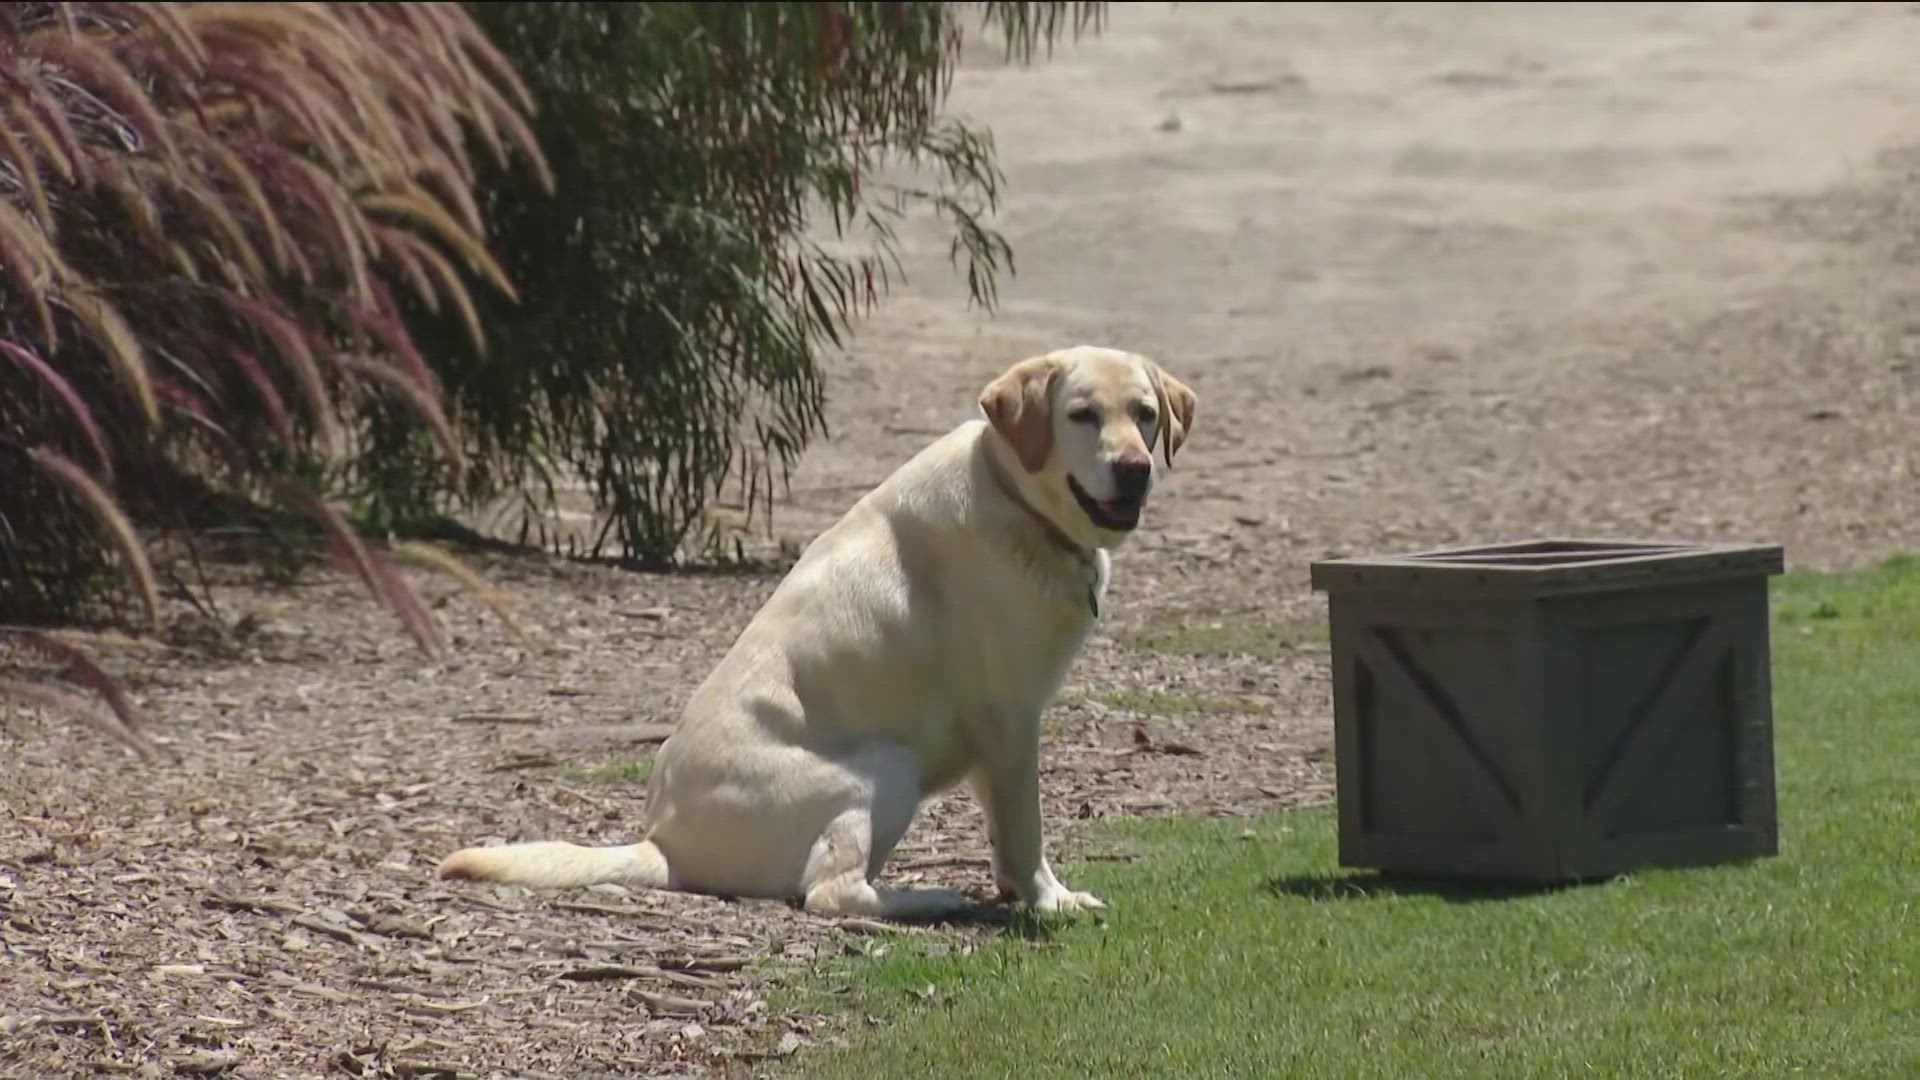 The San Diego Zoo takes us behind the scenes to learn about two of their conservation dogs.